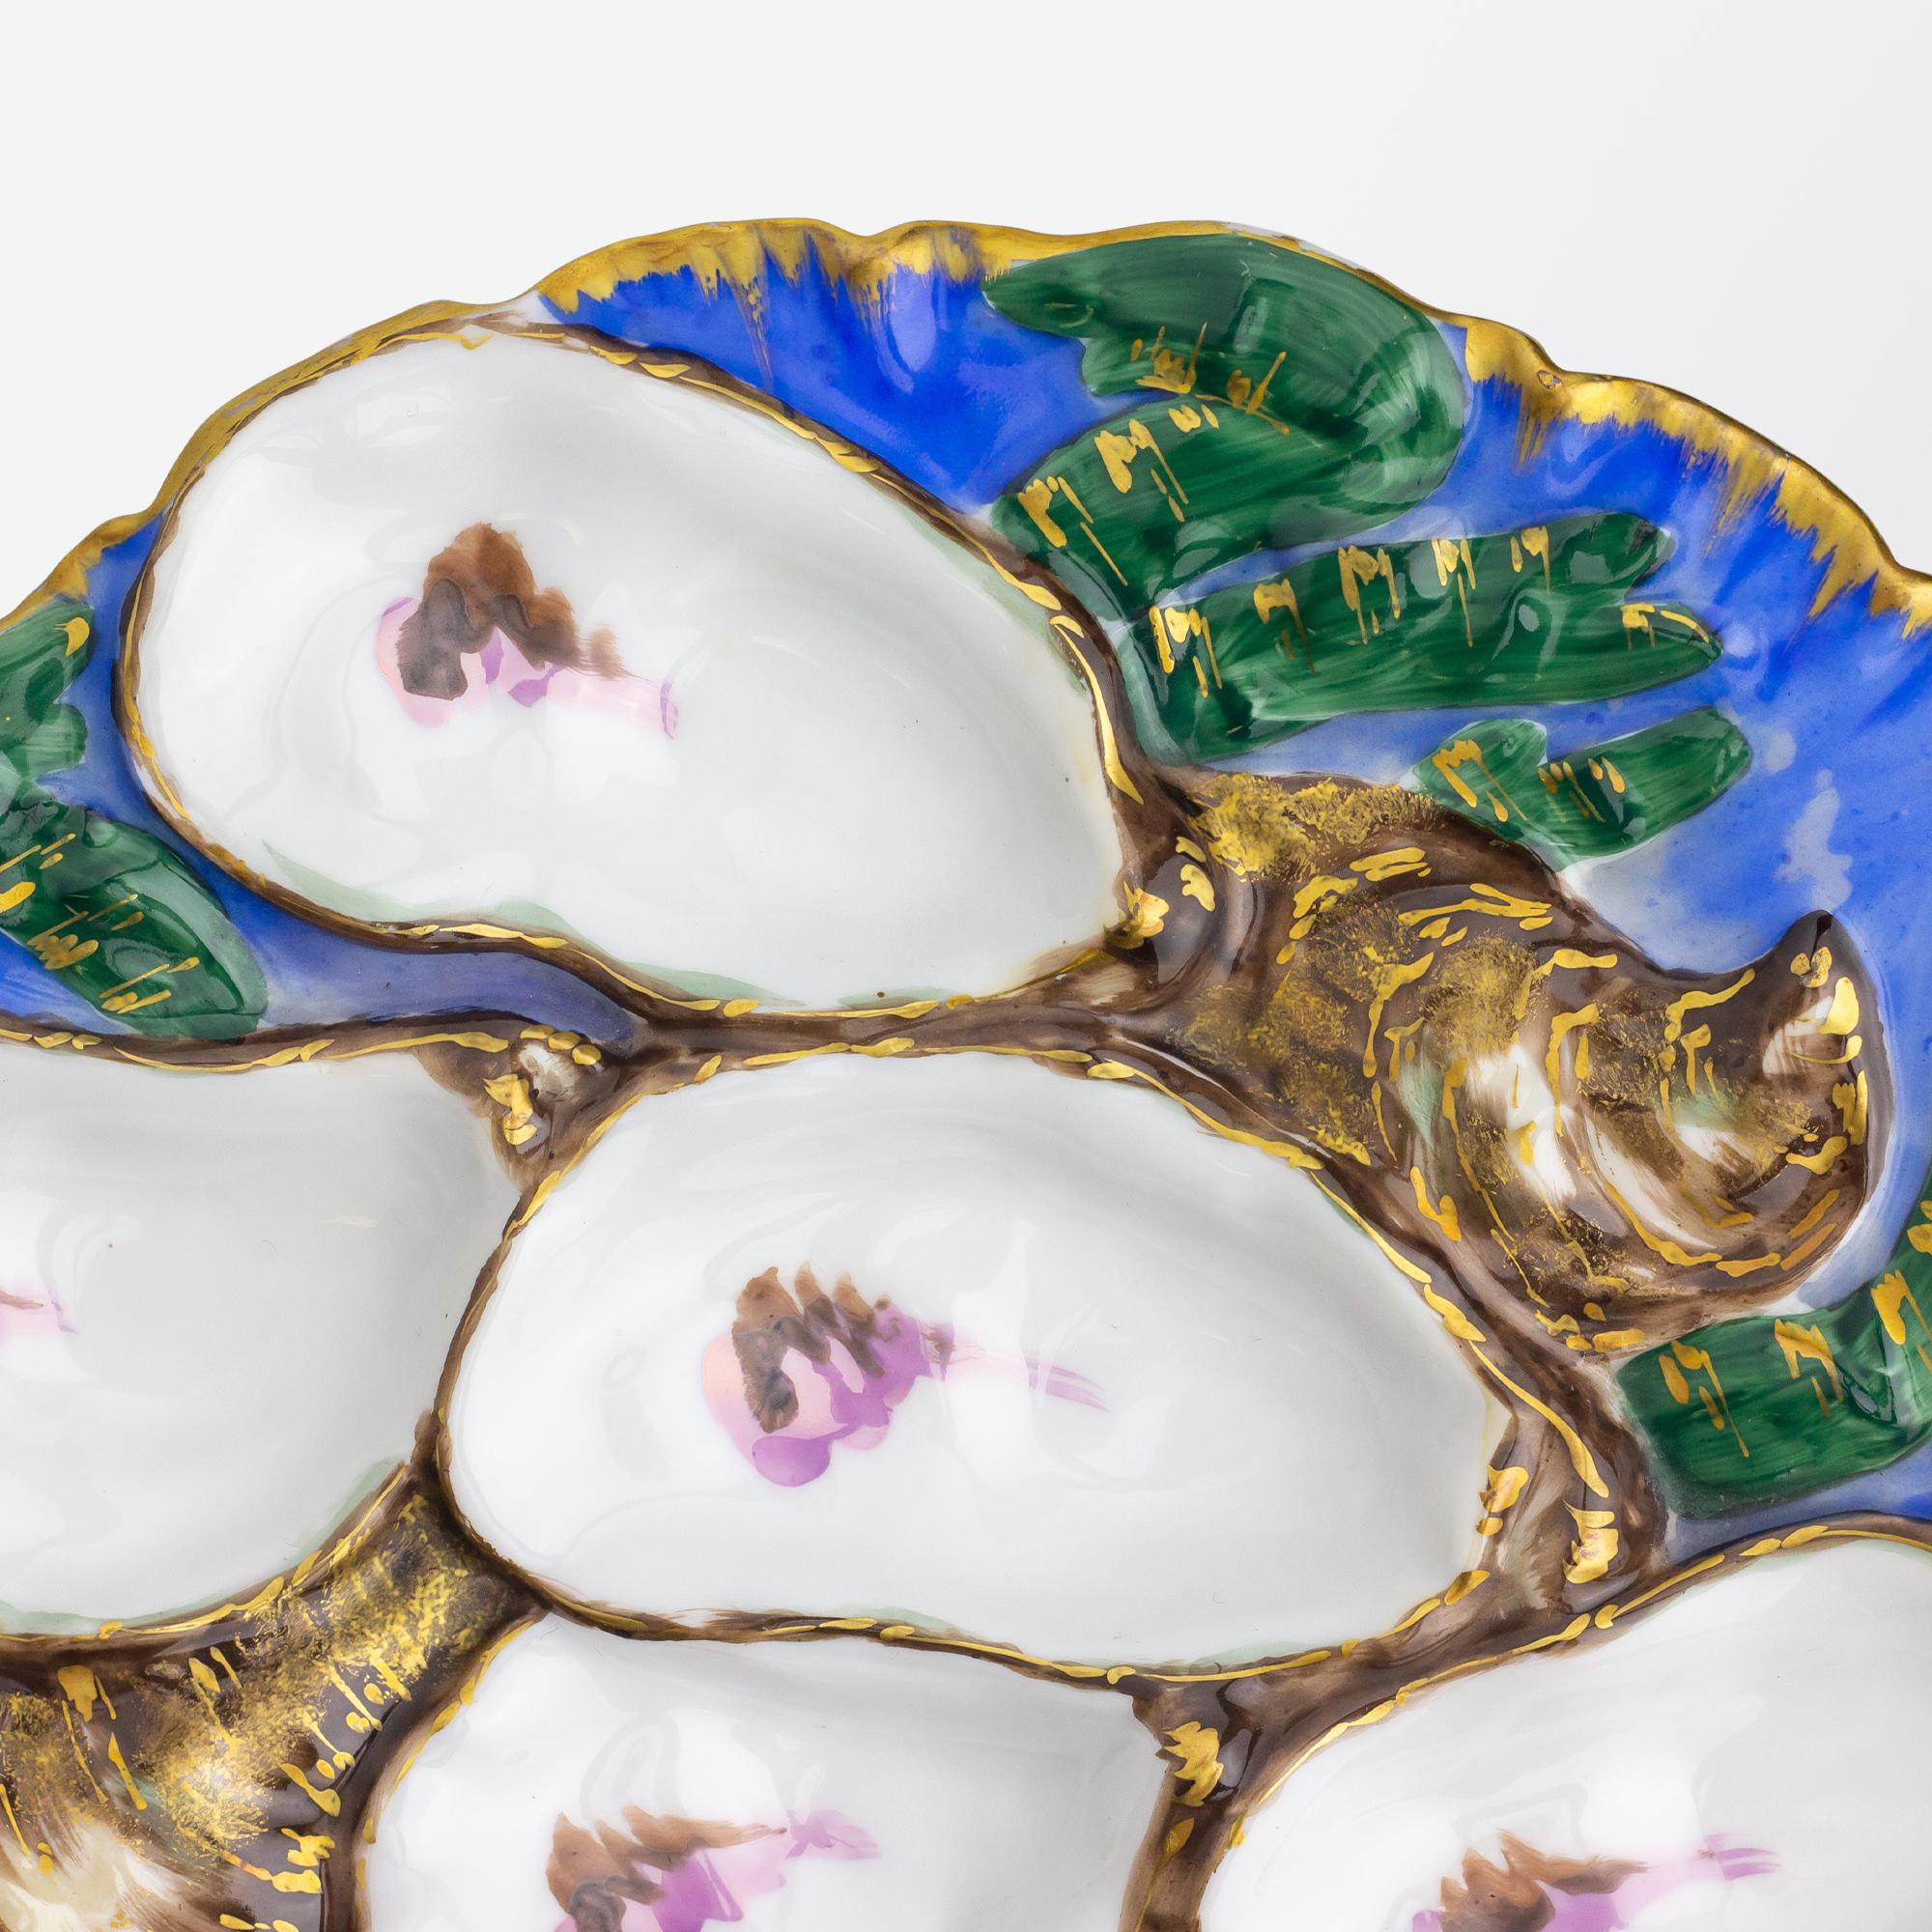 This unusual porcelain oyster plate dates to the 1880s and was crafted in Limoges from a design by Theodore R Davis for President and Mrs. Rutherford B Hayes. In 1879 there was a commission of a state dinner service for the President and his wife